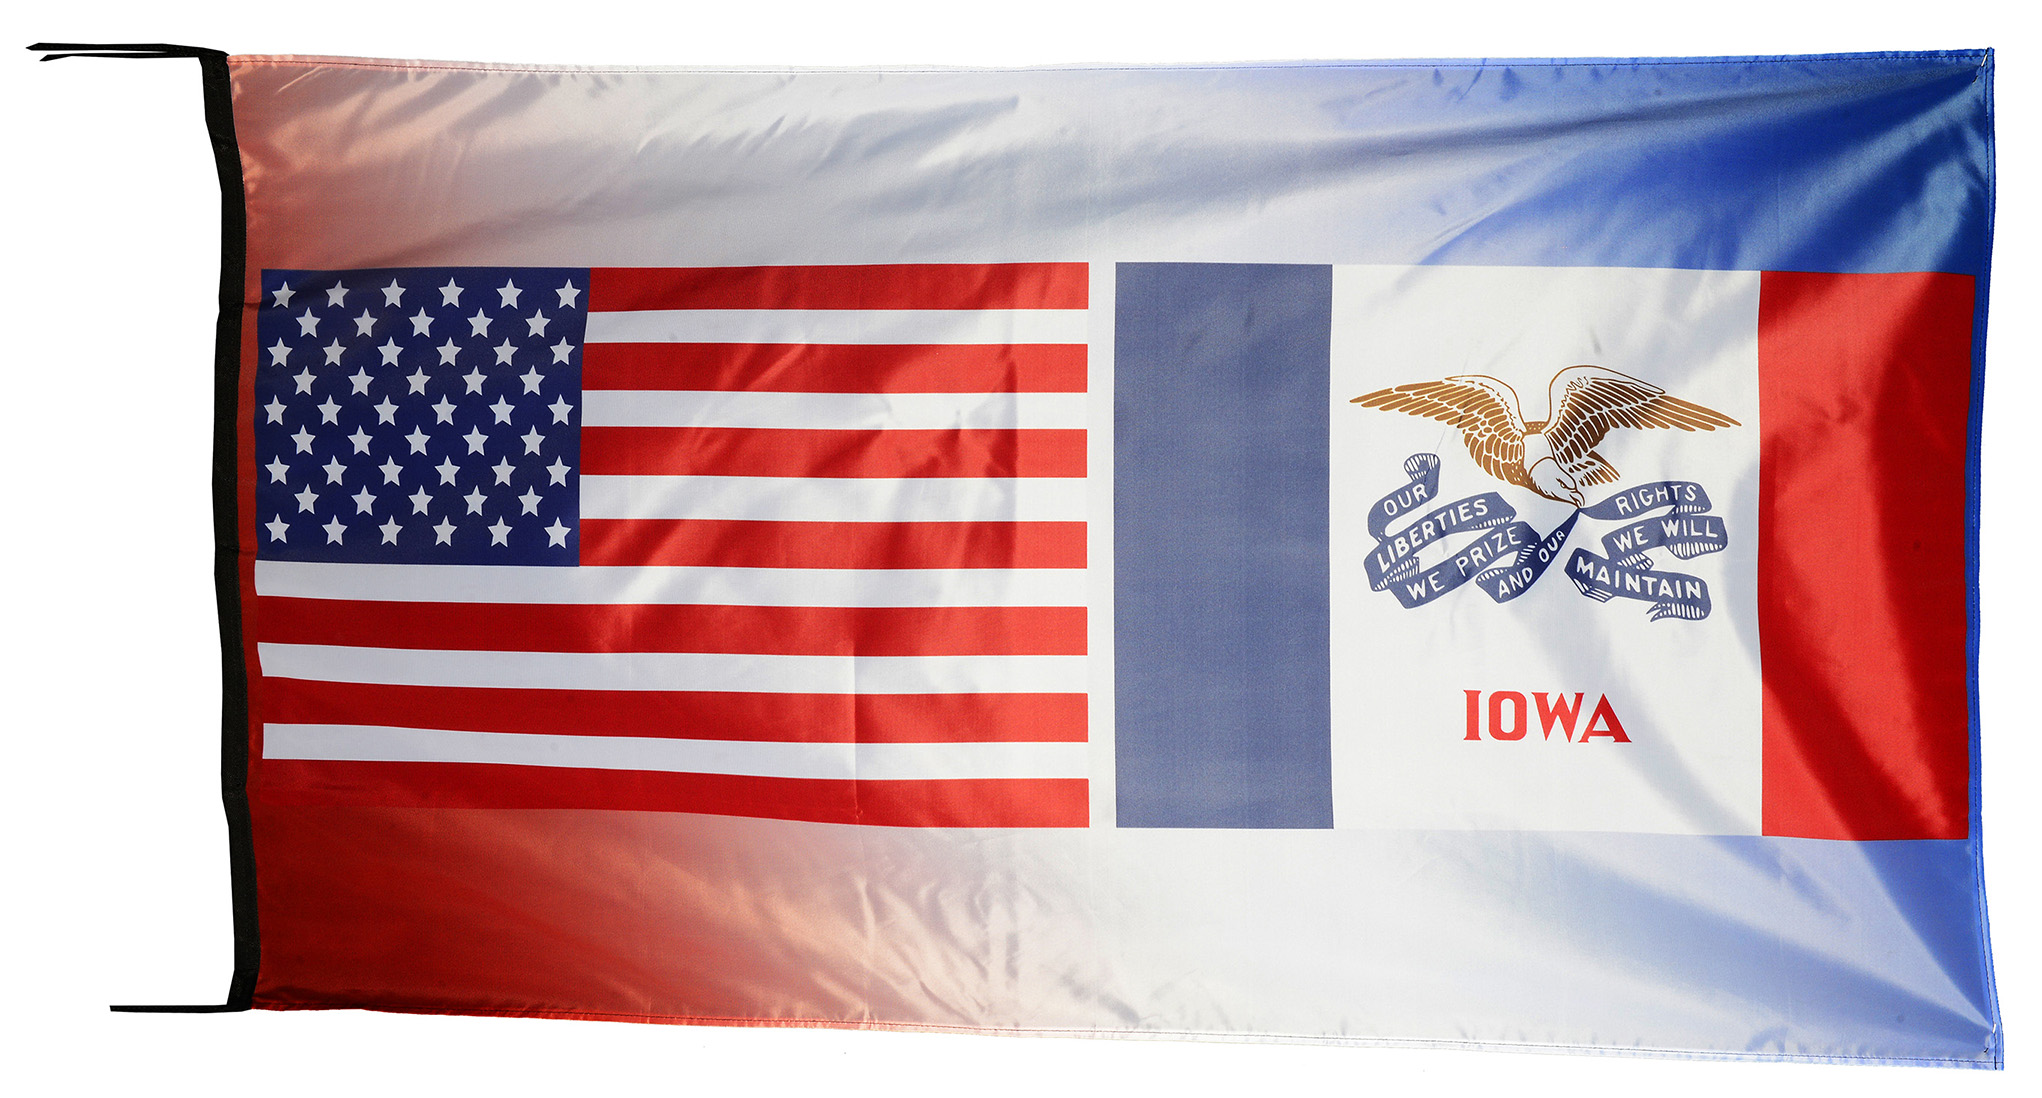 Flag  114 USA / US Country / United States Of America and Rhode Island State / Patriotic / Pride Hybrid Weather-Resistant Polyester Outdoor Flag Landscape Banner / Vivid Colors / 3 X 5 FT (150 x 90cm) International Flags for Sale